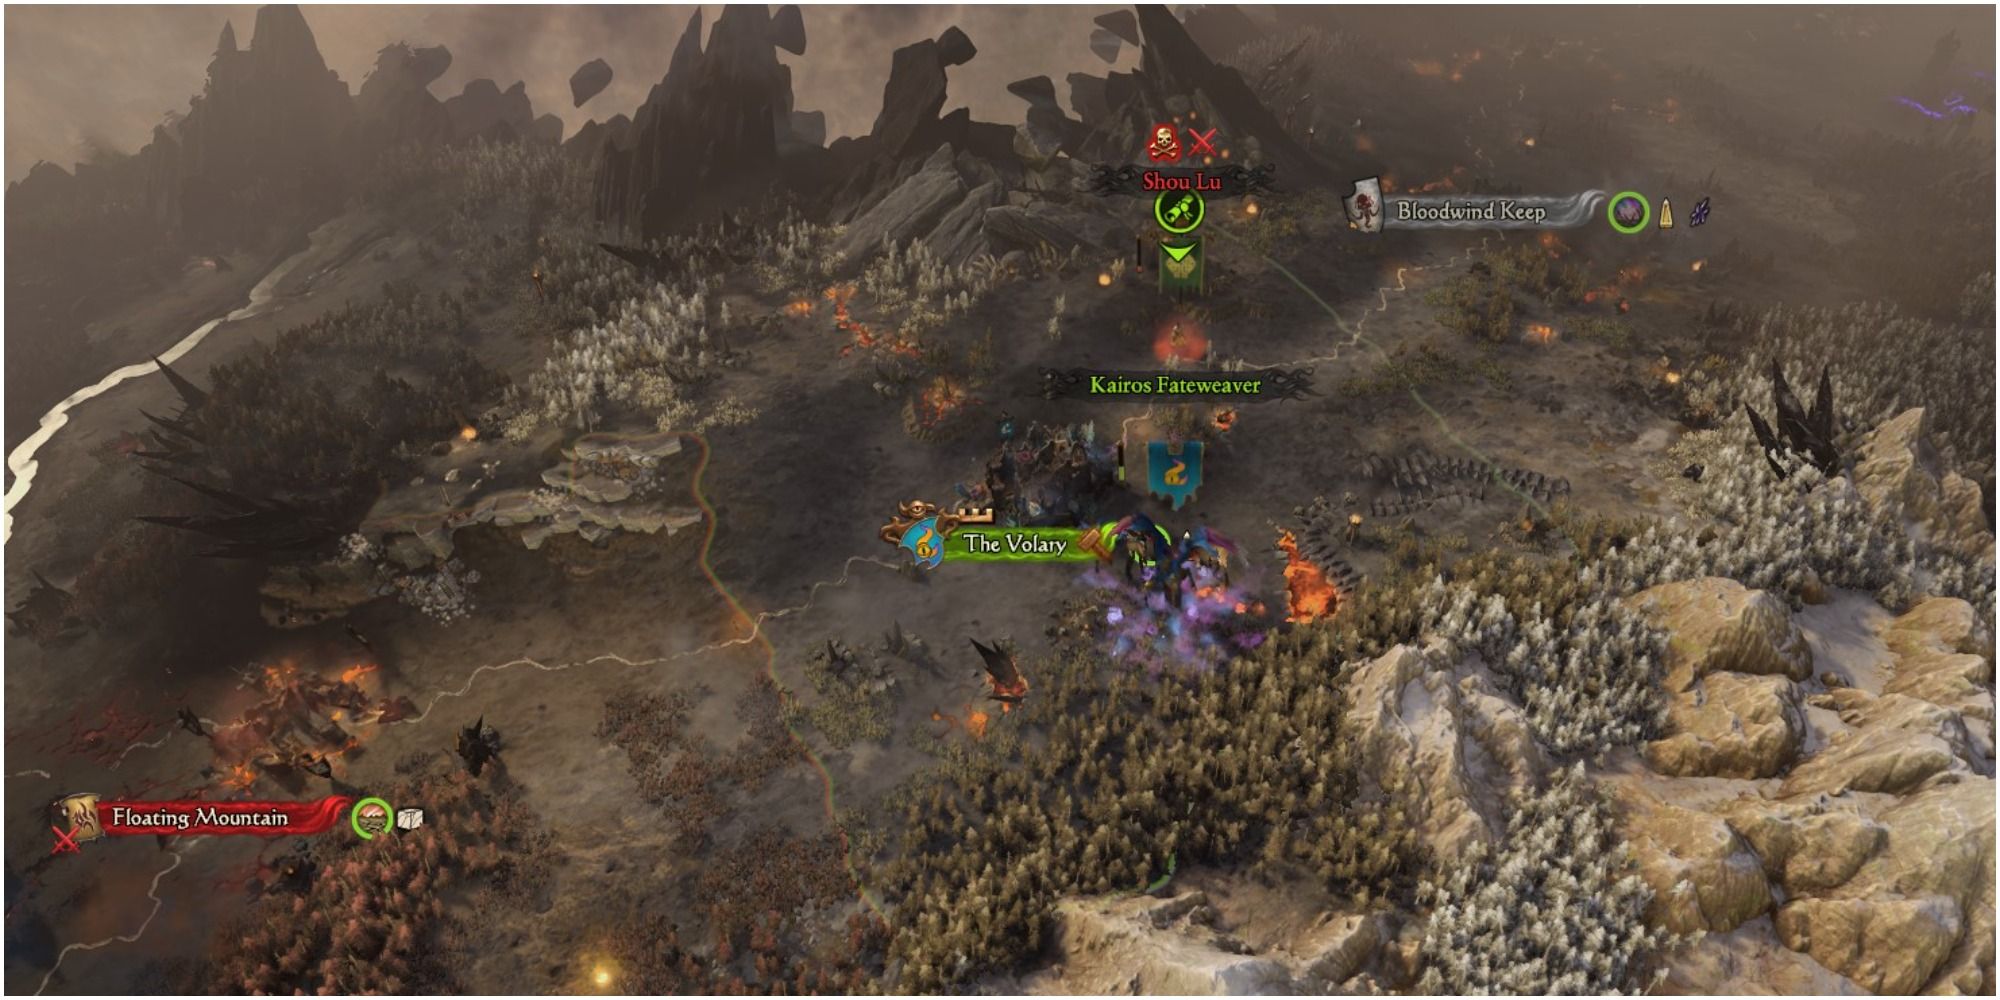 Kairos Fateweaver Start Position On Campaign Map In Total War Warhammer 3